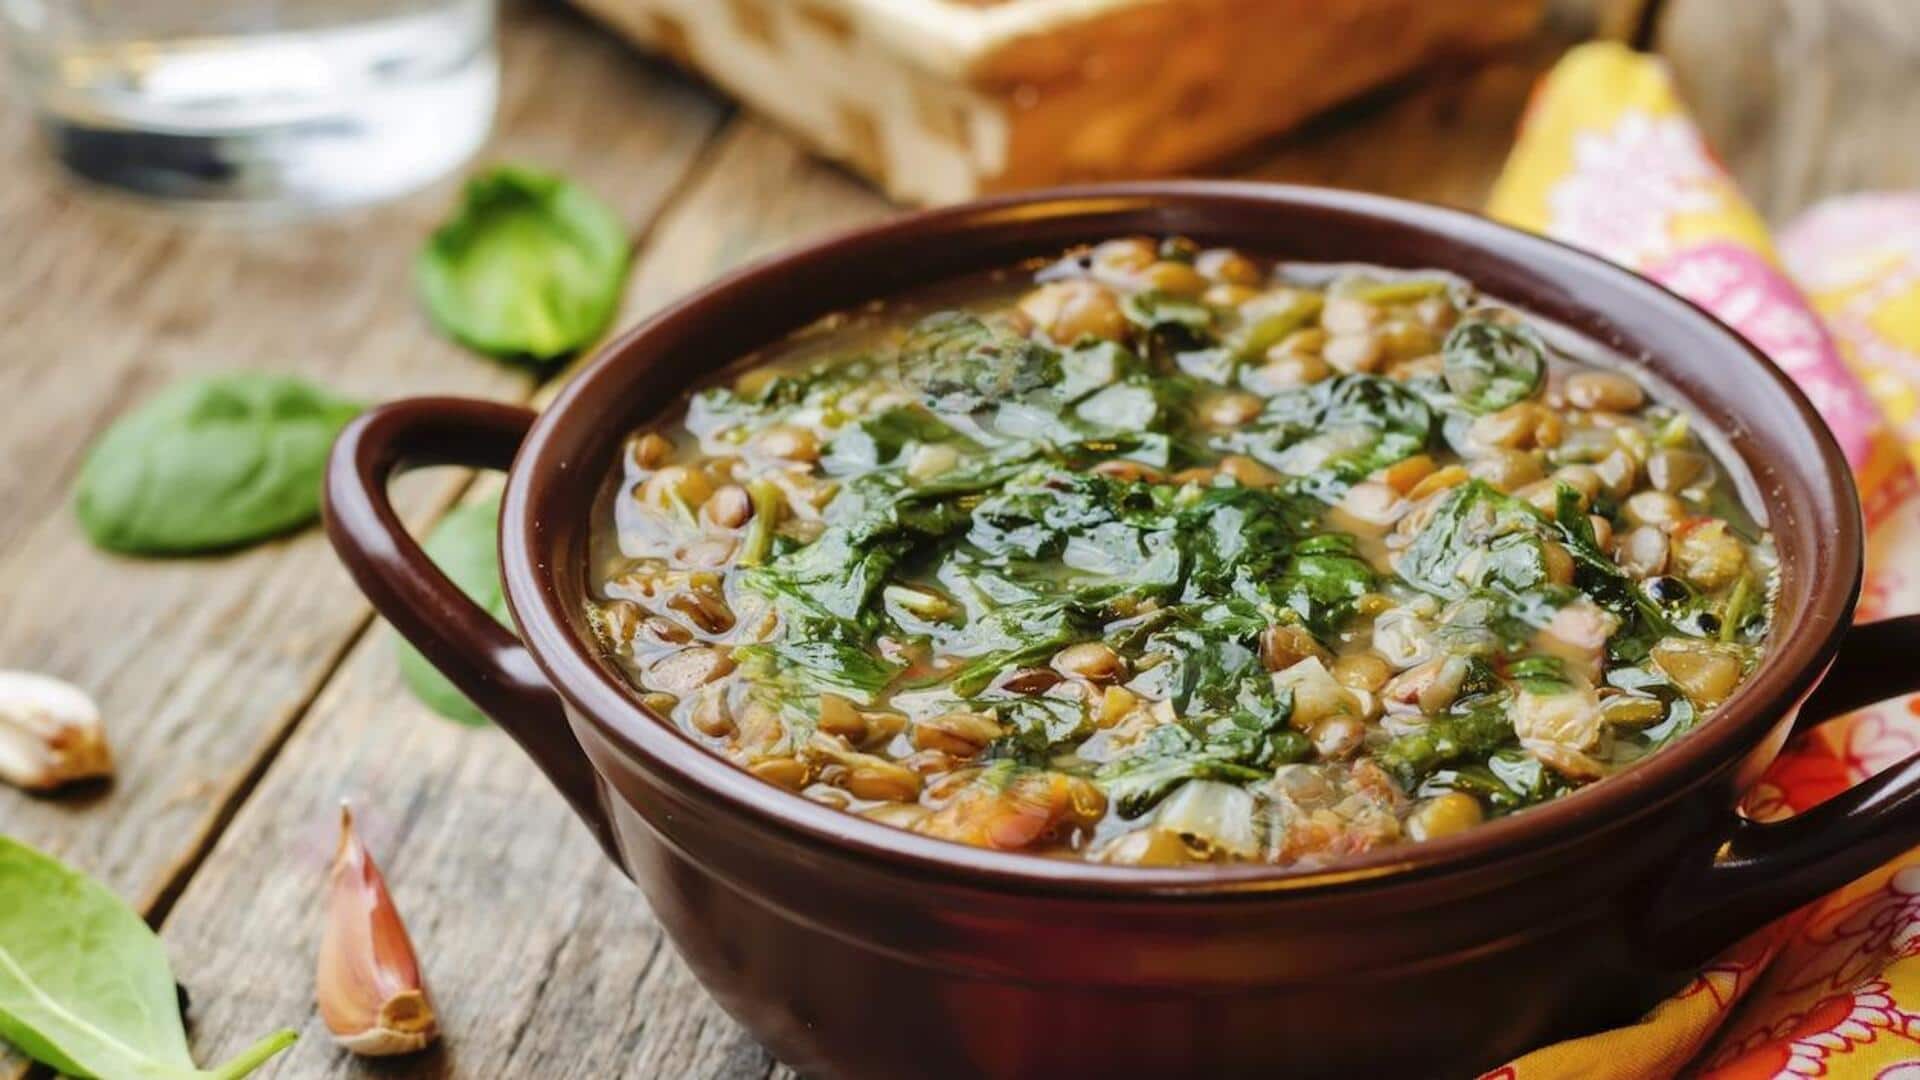 Your guests will love this Swiss chard lentil soup recipe